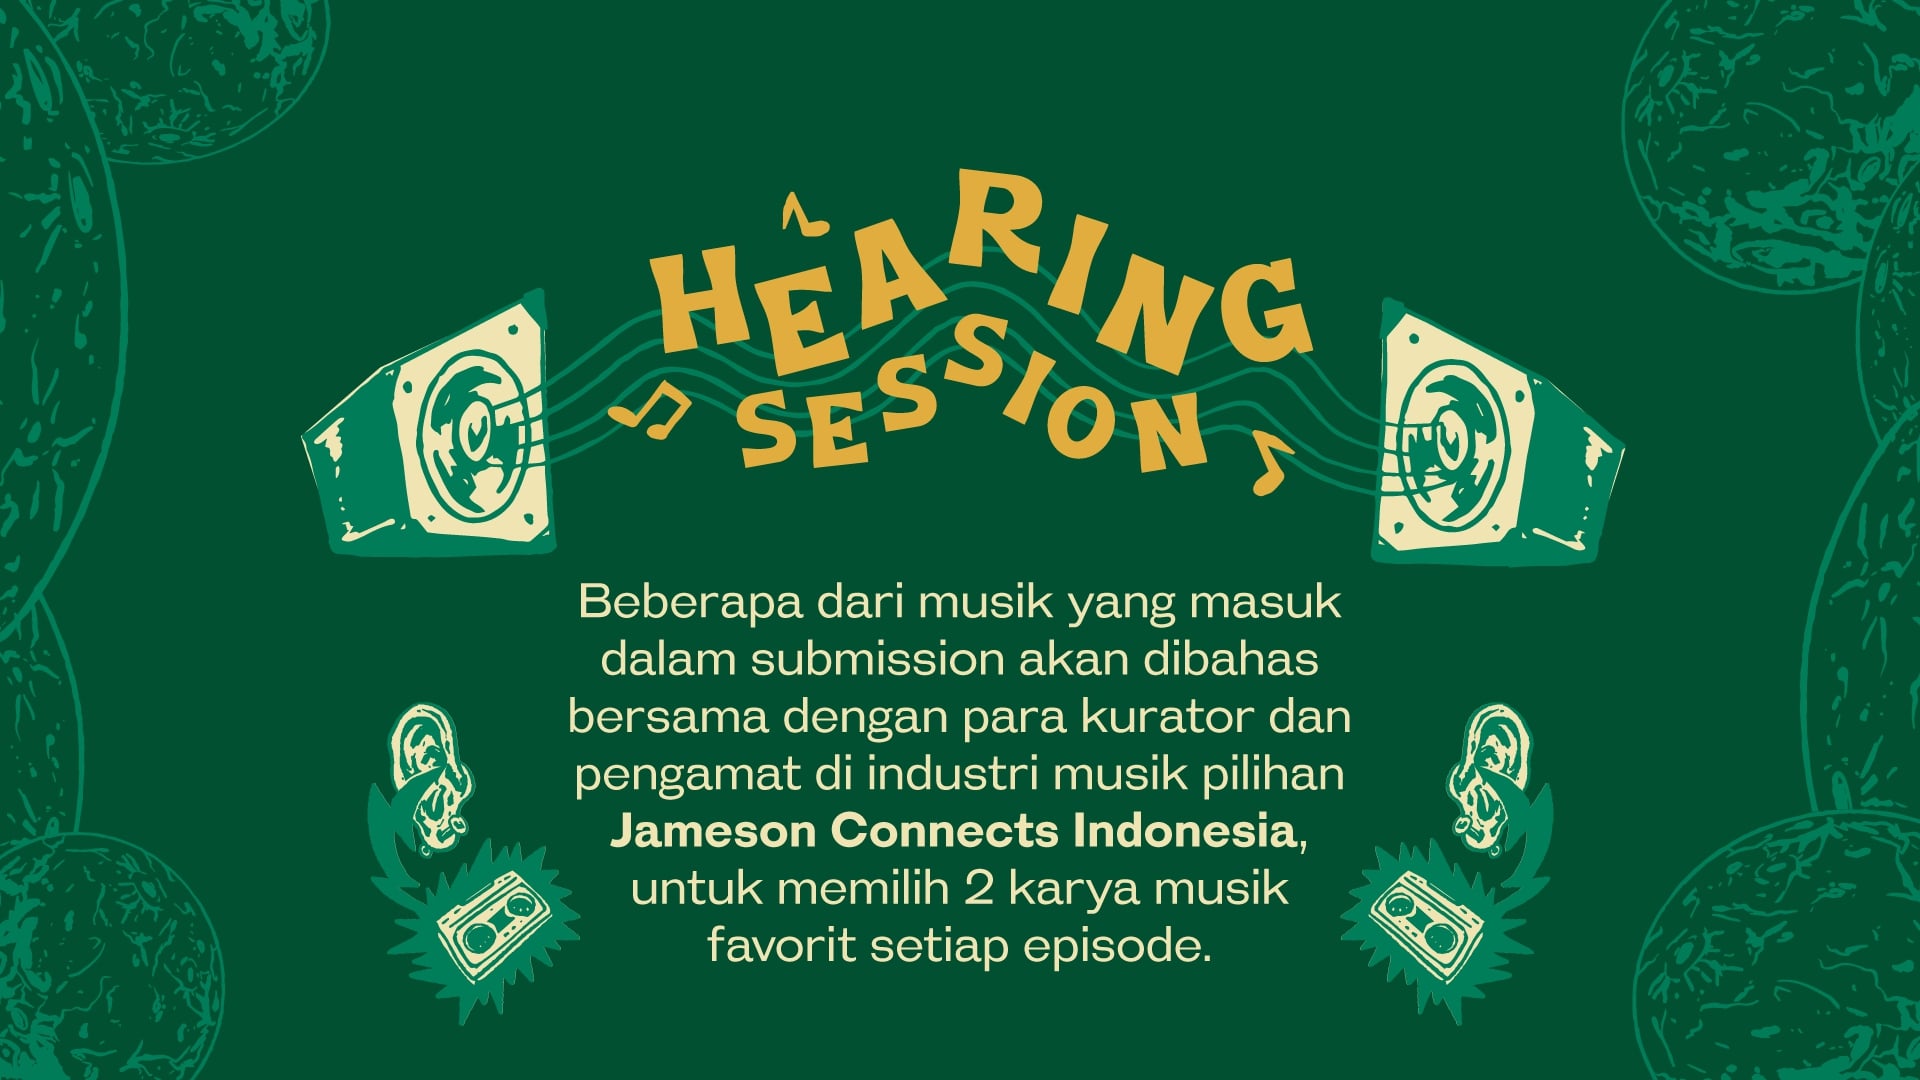 Hearing Session